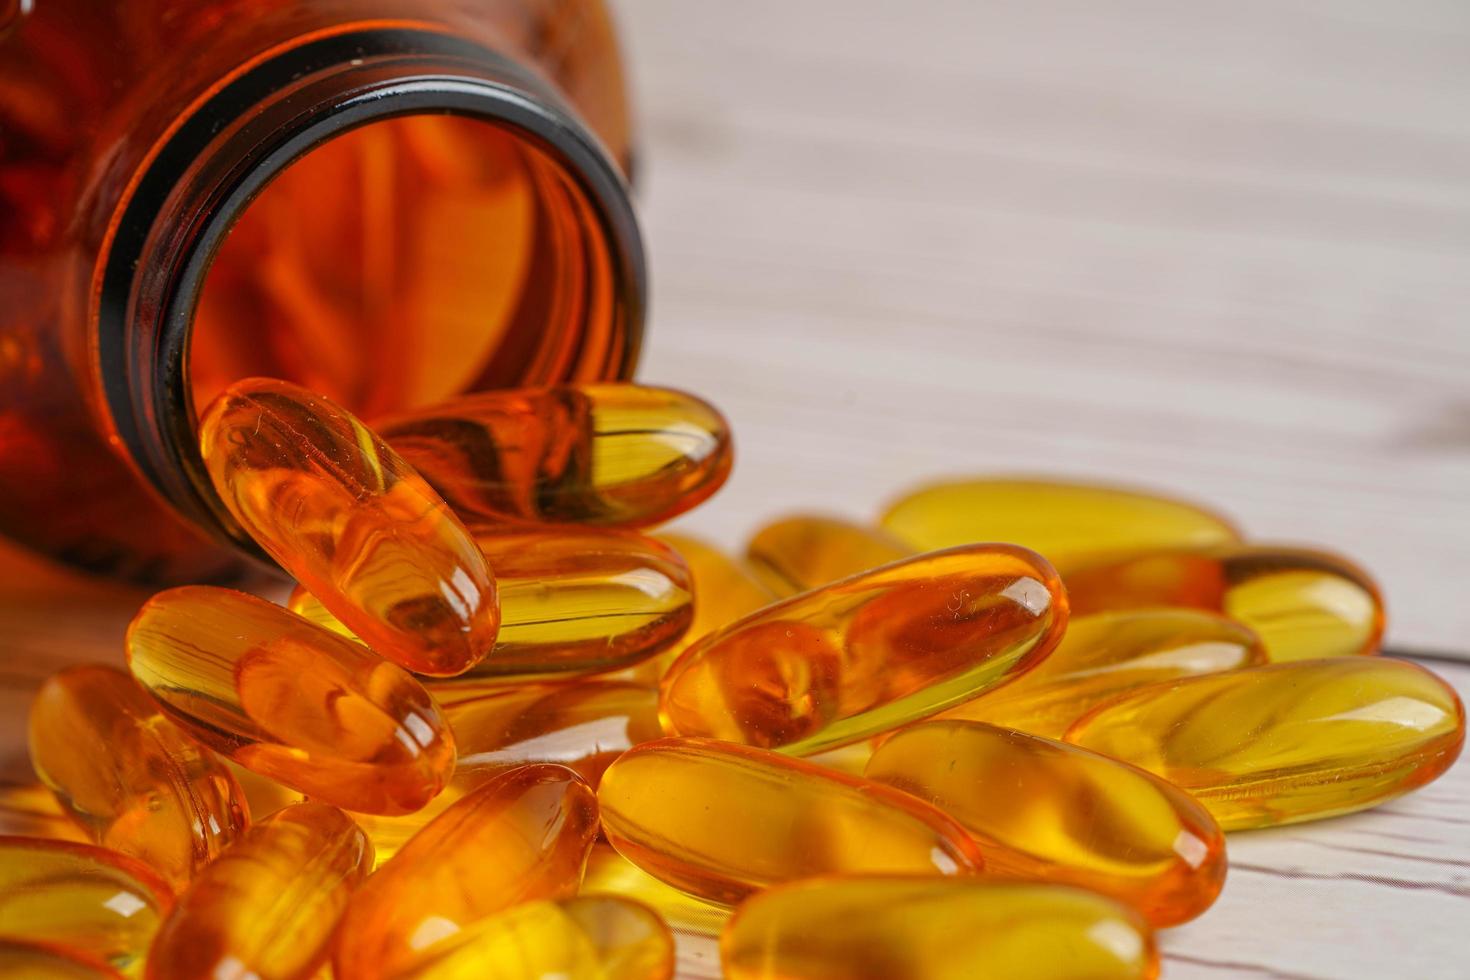 Fish oil or Cod liver oil gel in capsules with omega 3 vitamins, supplementary healthy food photo